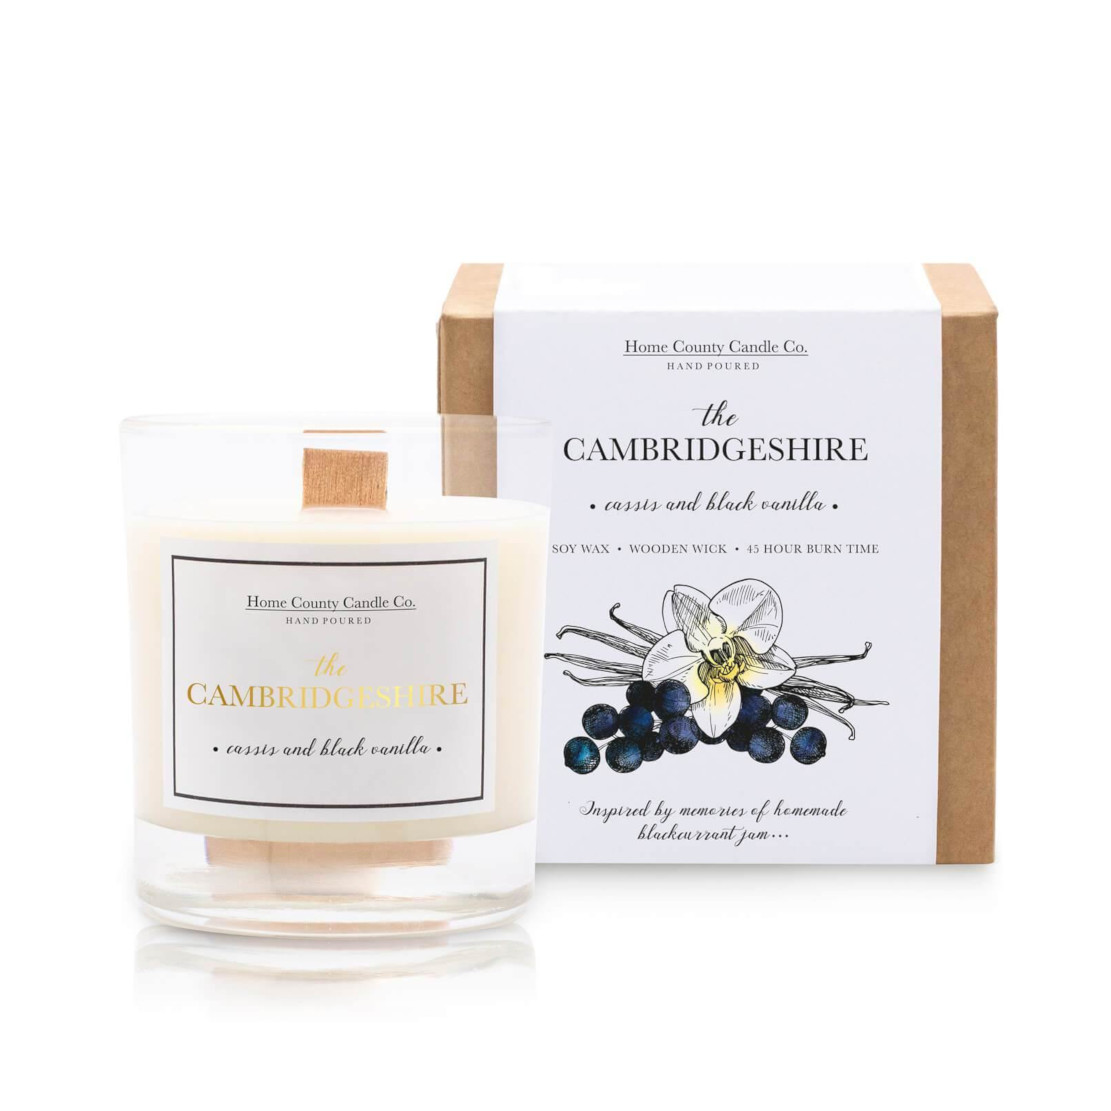 Home County Candle Cambridgeshire 200g Soy Candle